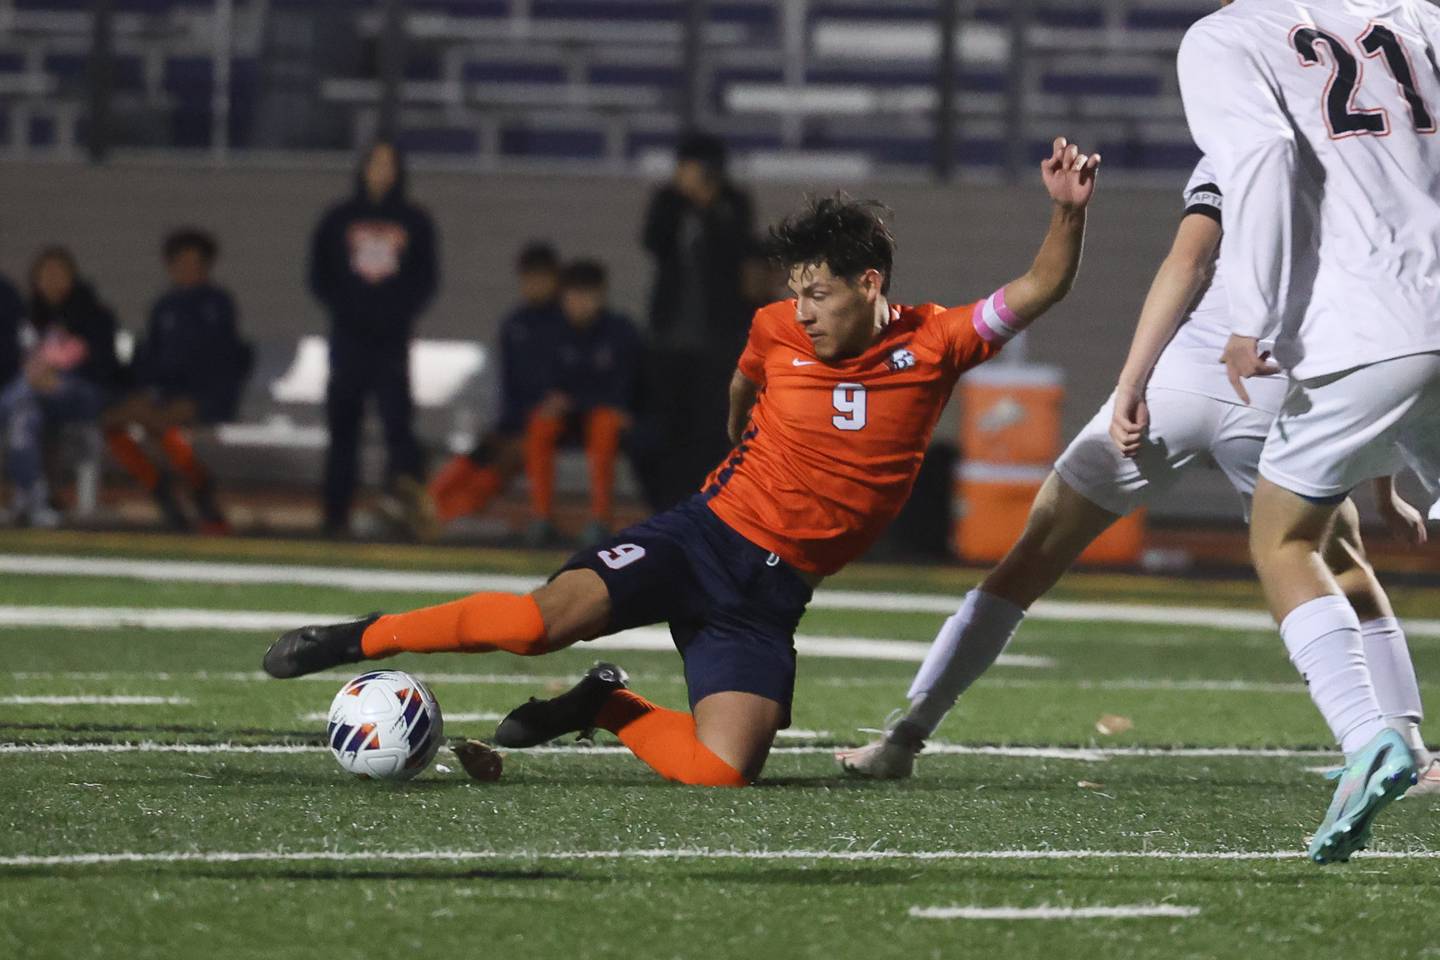 Romeoville’s Joseph Duarte makes a diving kick against Edwardsville in the Class 3A Bloomington Super-Sectional on Tuesday.